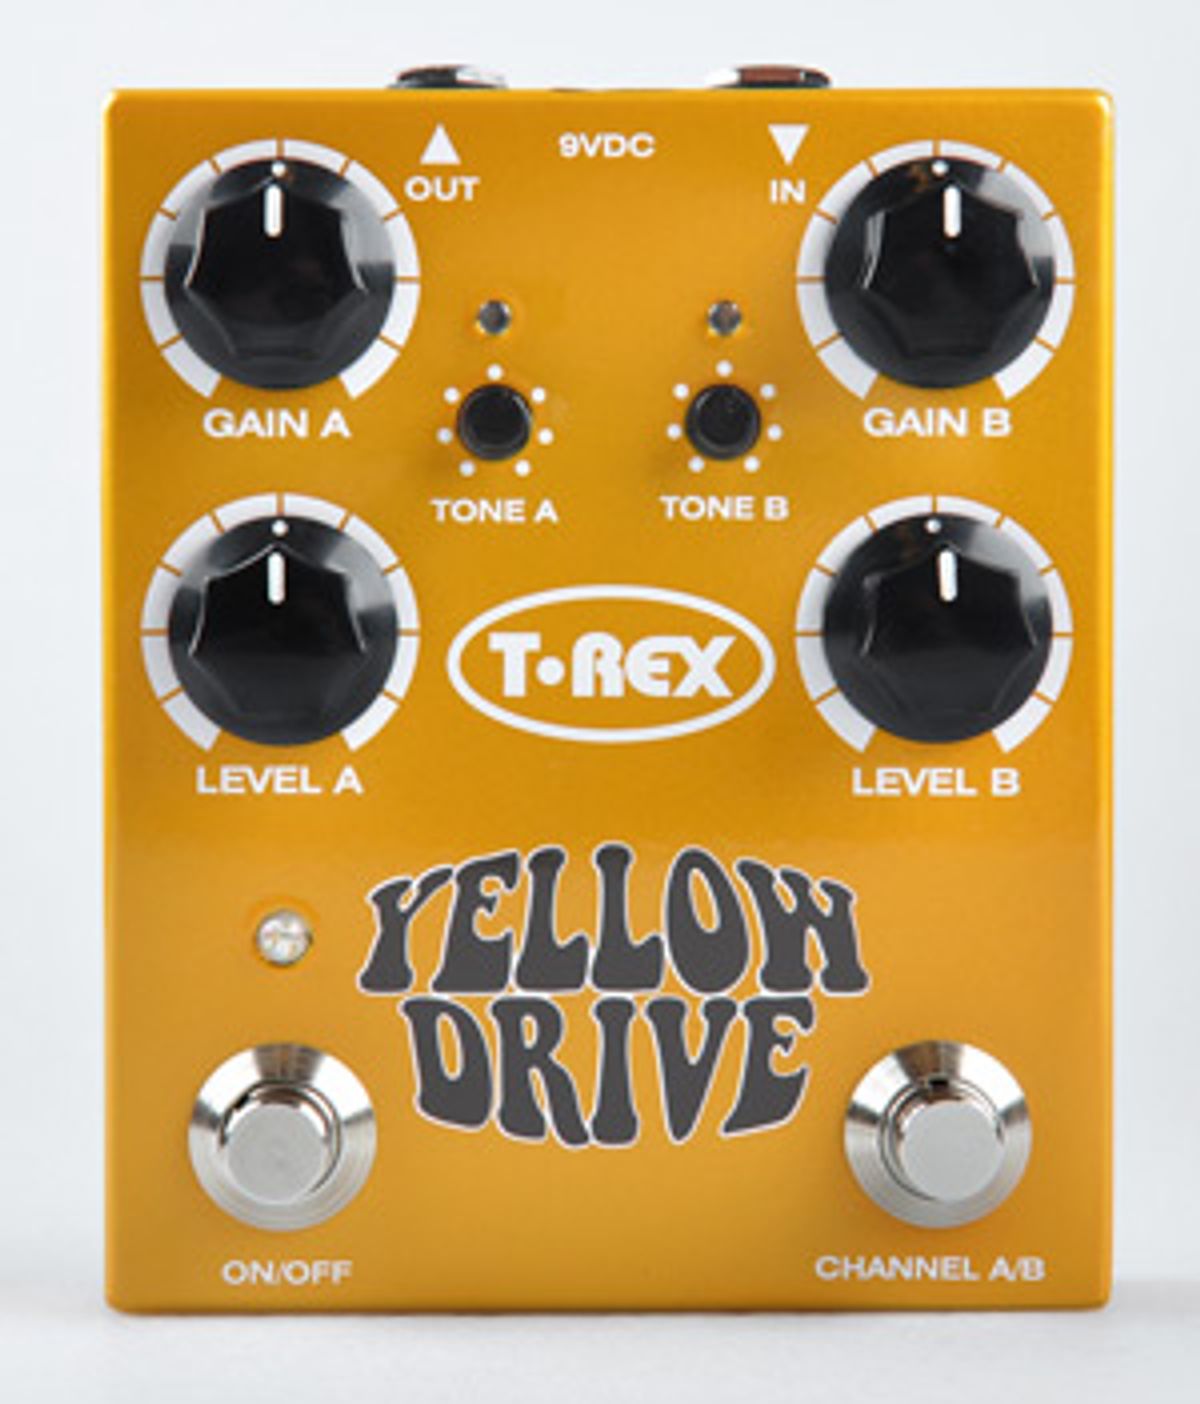 T-Rex and Guitar Center Launch Exclusive Pedal Line With Yellow Drive